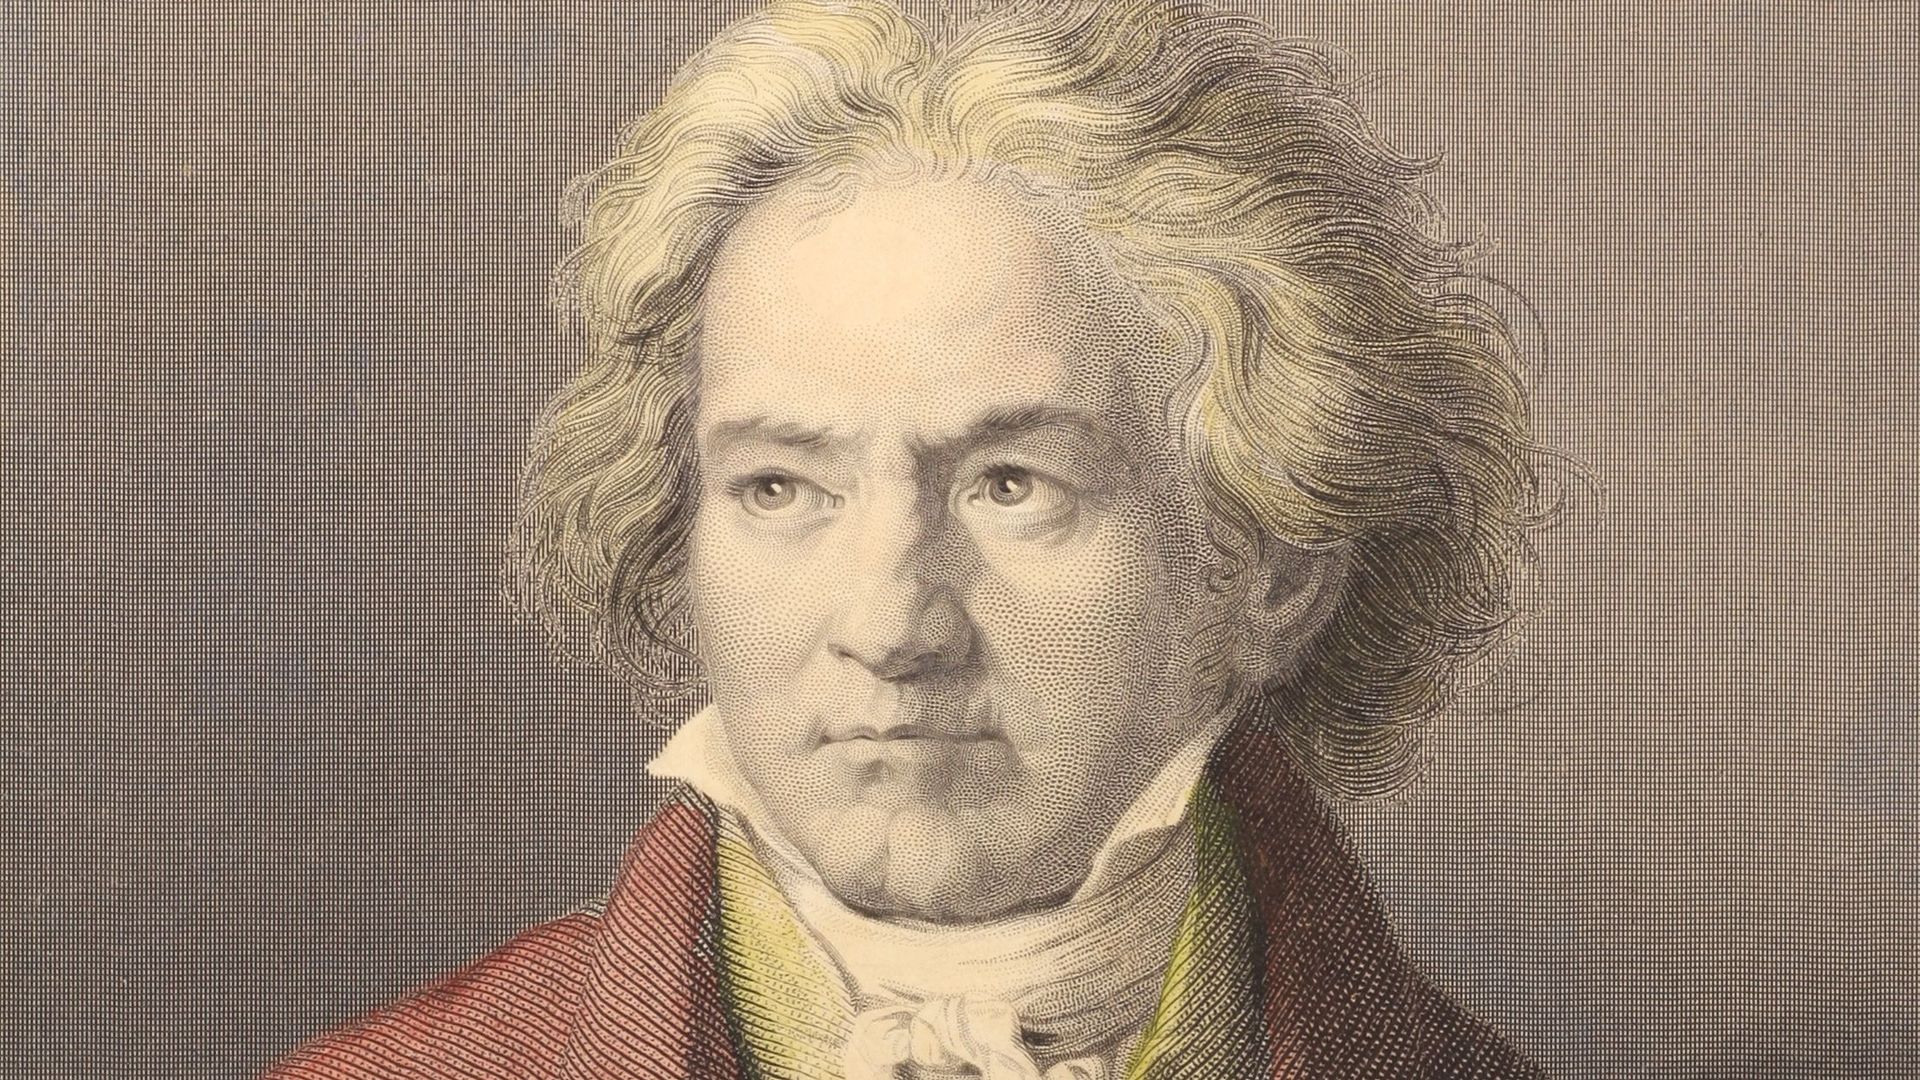 Ludwig van Beethoven in sepia colored photo